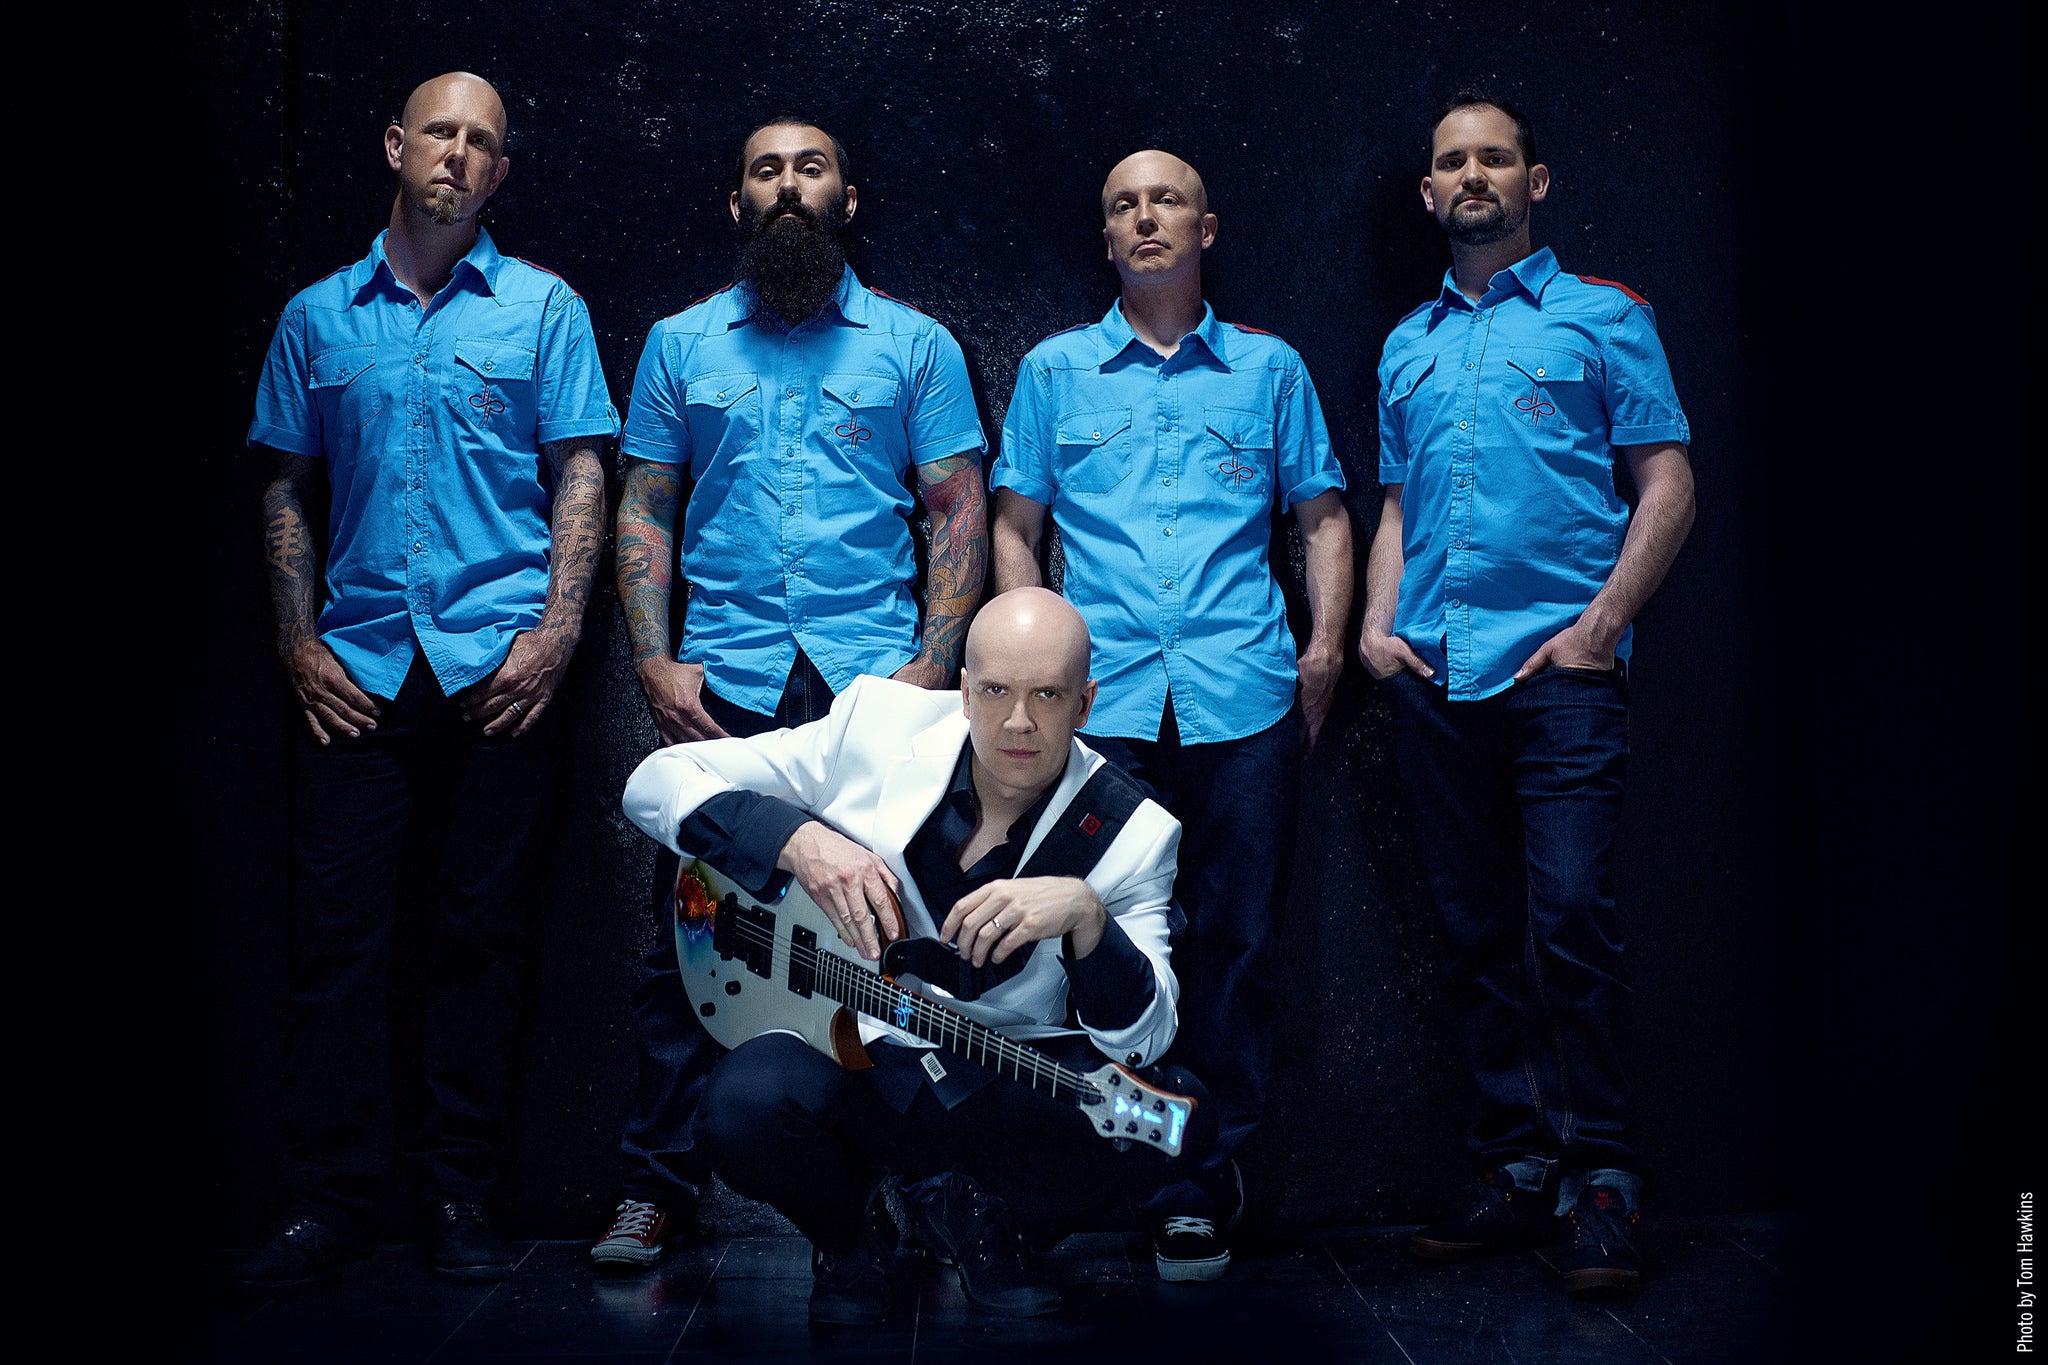 Devin Townsend's band The Devin Townsend project